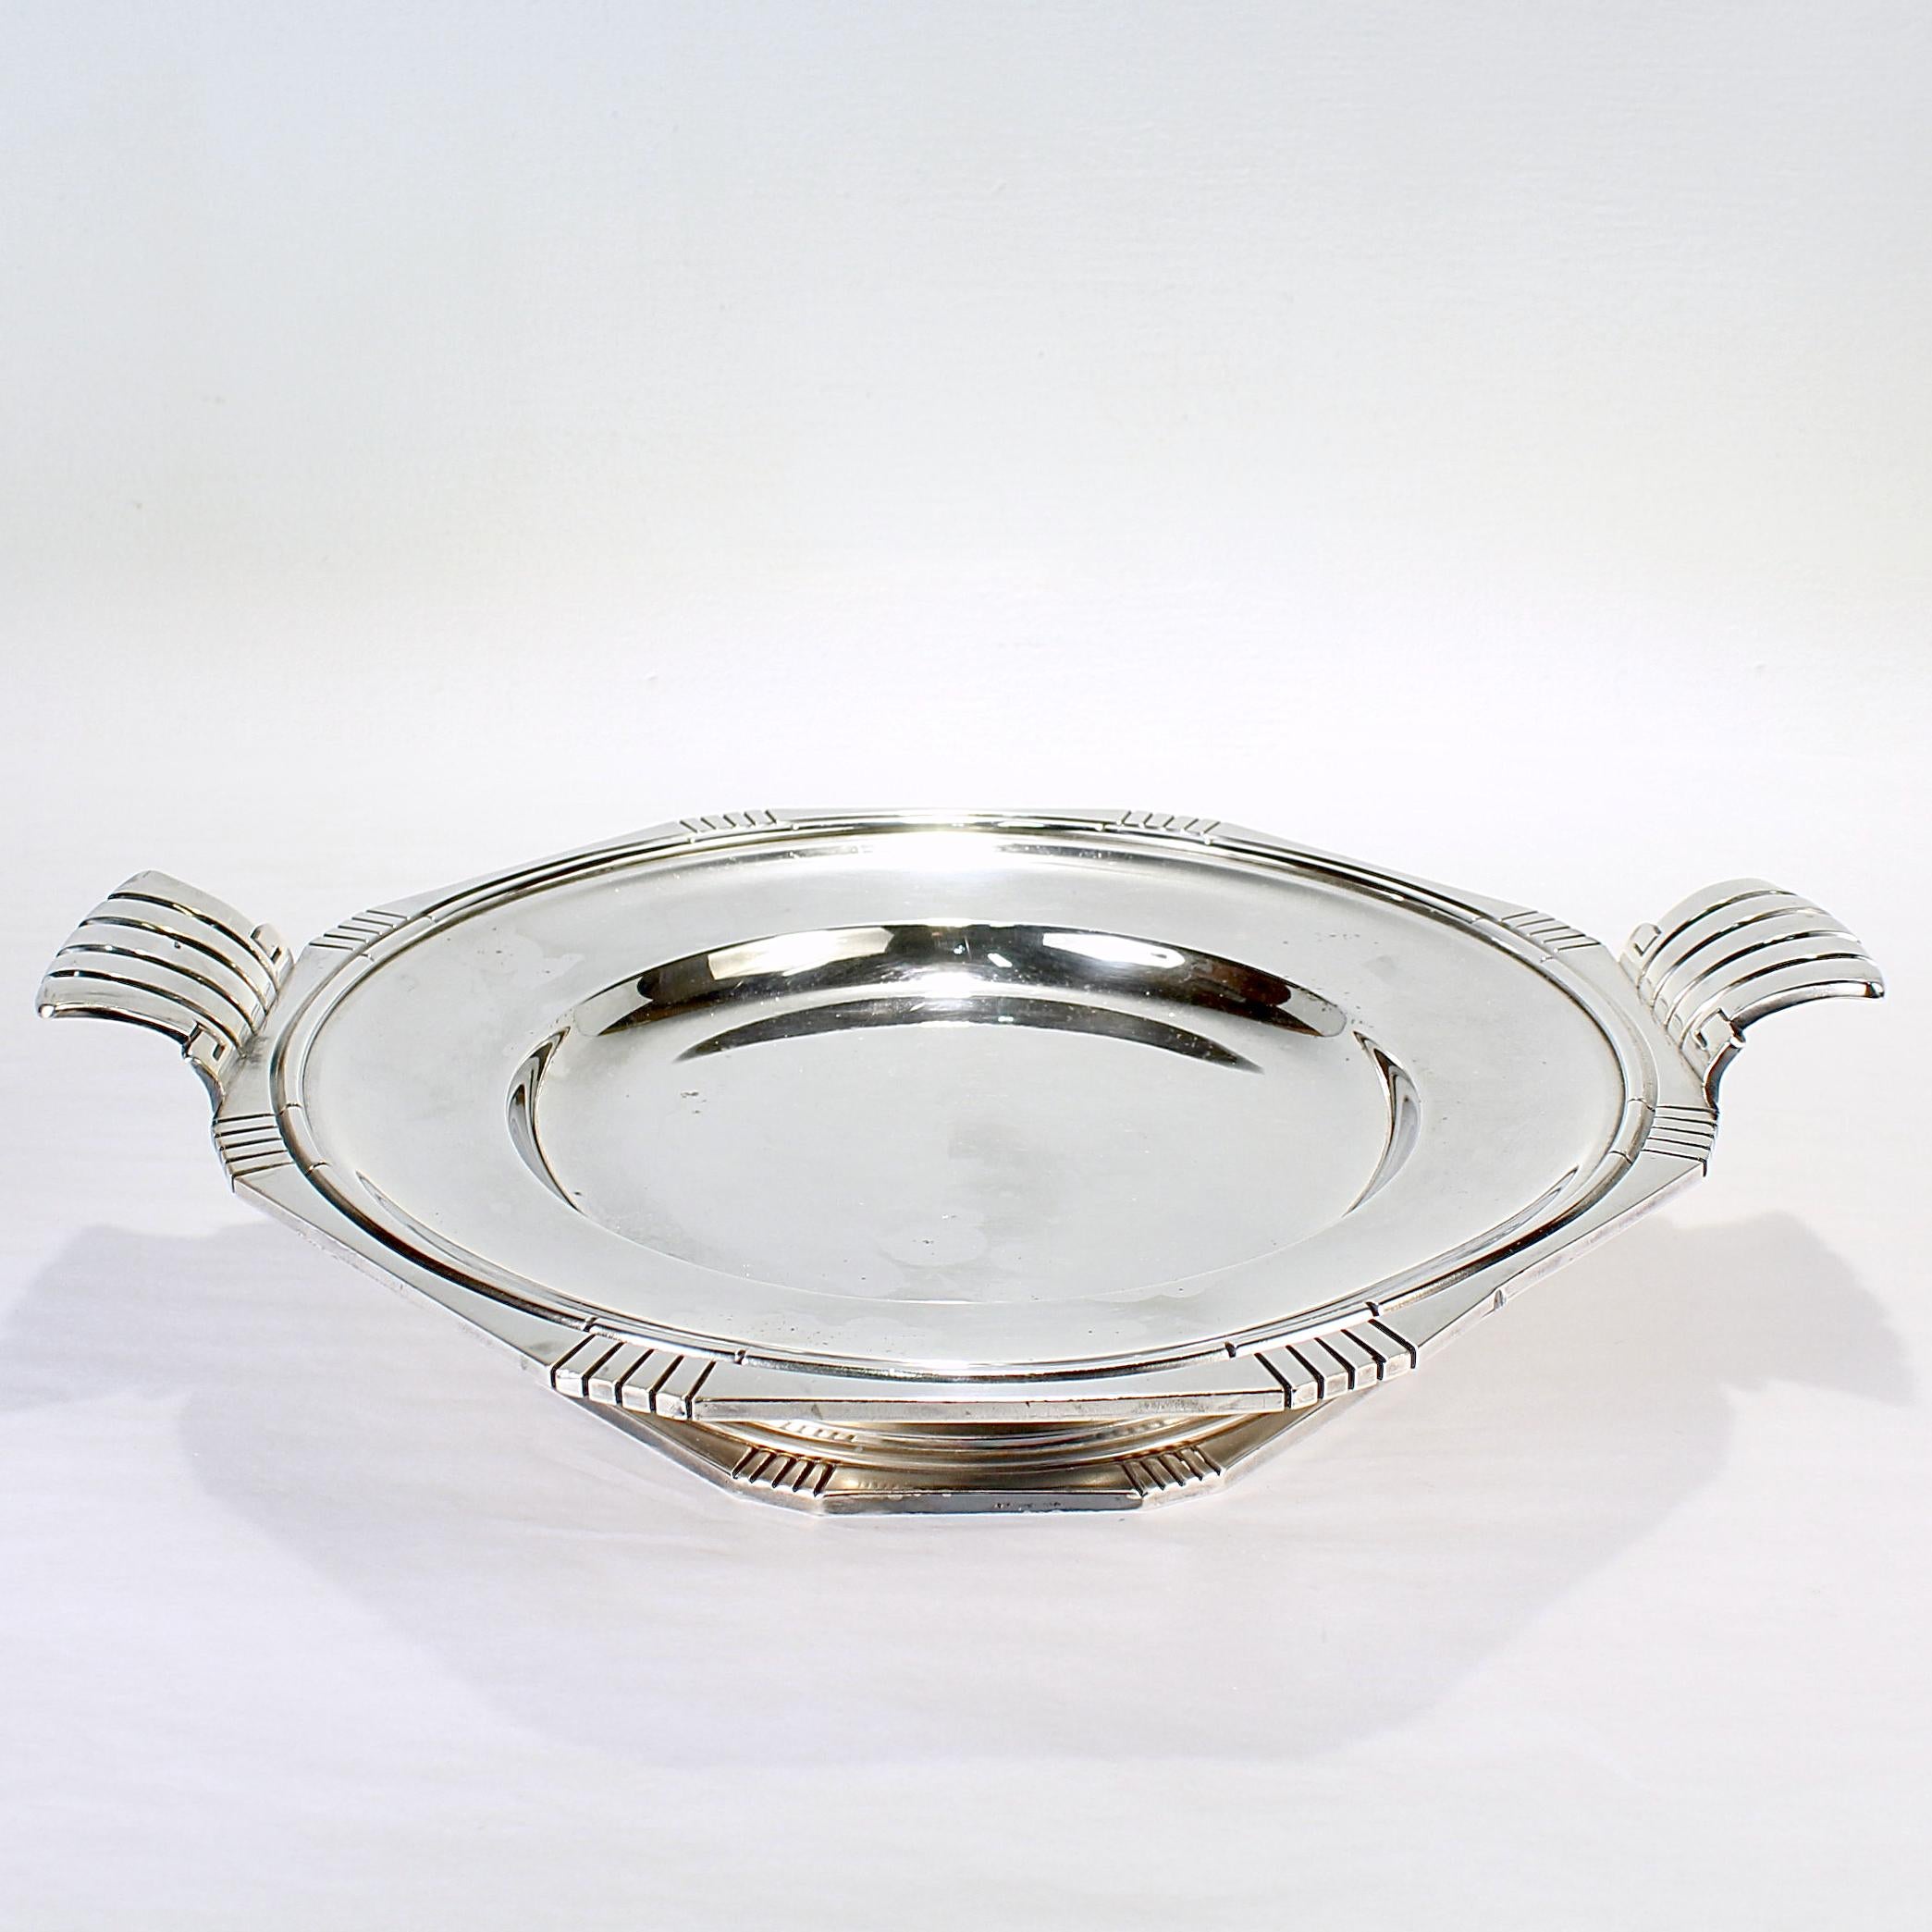 A fine signed French Art Deco period tazza.

In silver plate.

Apparently marked for Durousseau & Reynaud of Lyon, France.

Simply a fine French Art Deco form!

Date:
Early 20th Century

Overall Condition:
It is in overall fair, as-pictured, used